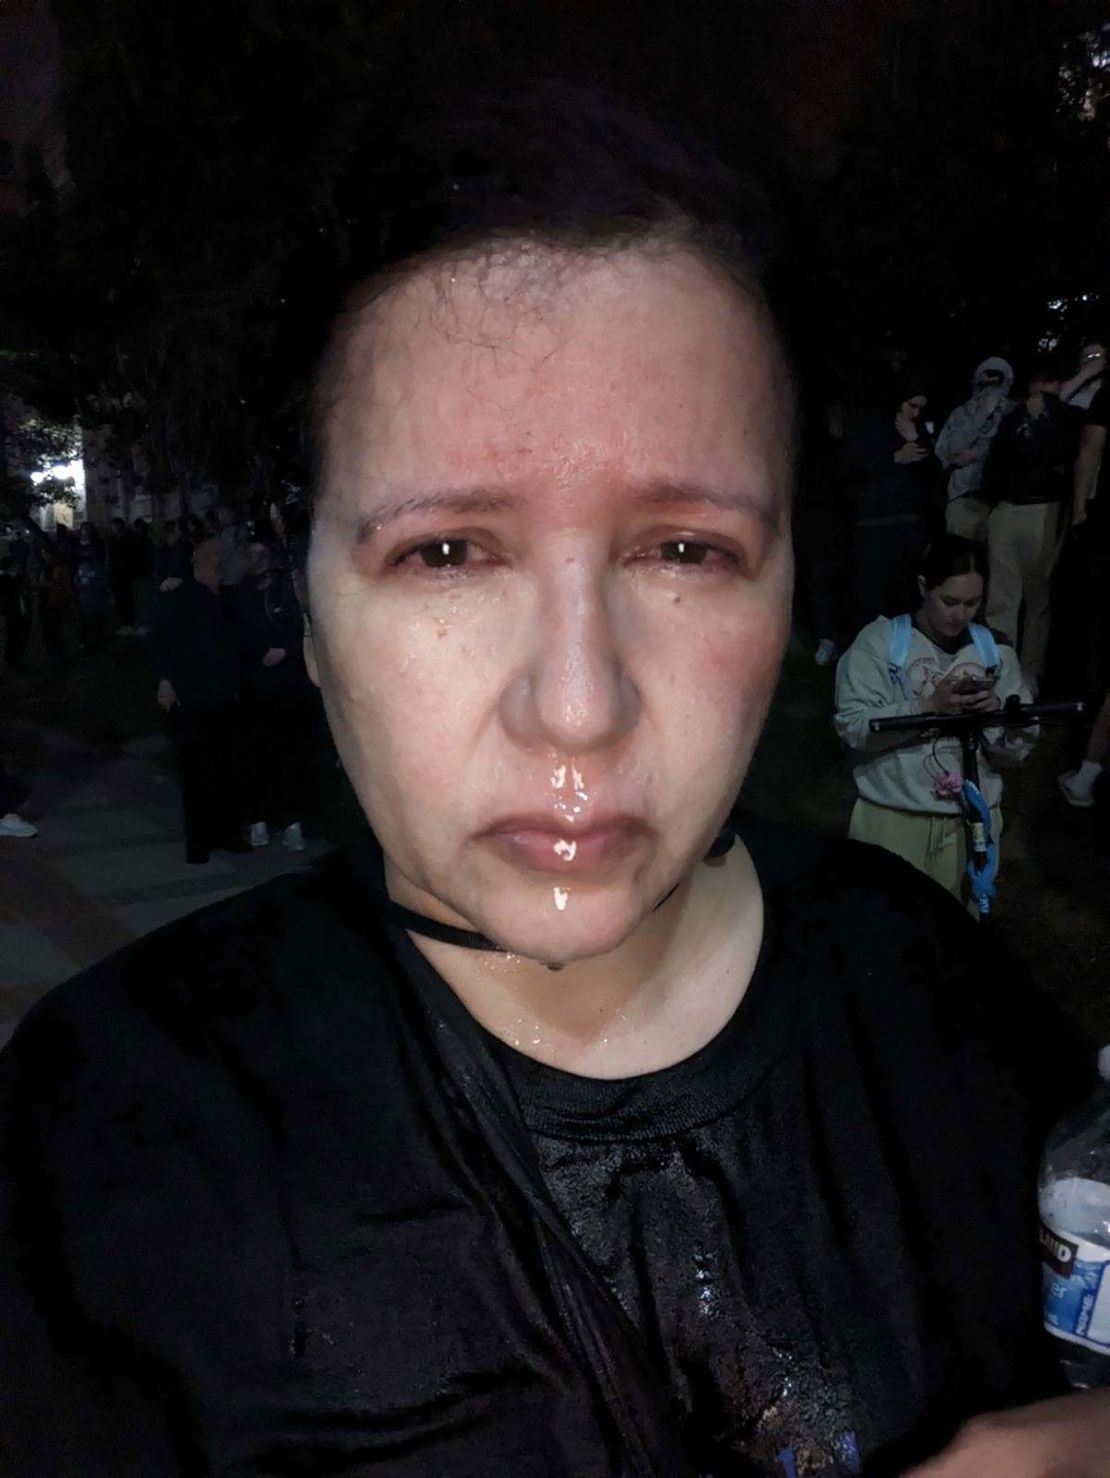 Dolores Quintana pictured shortly after being pepper-sprayed while covering the protests at UCLA in early May.